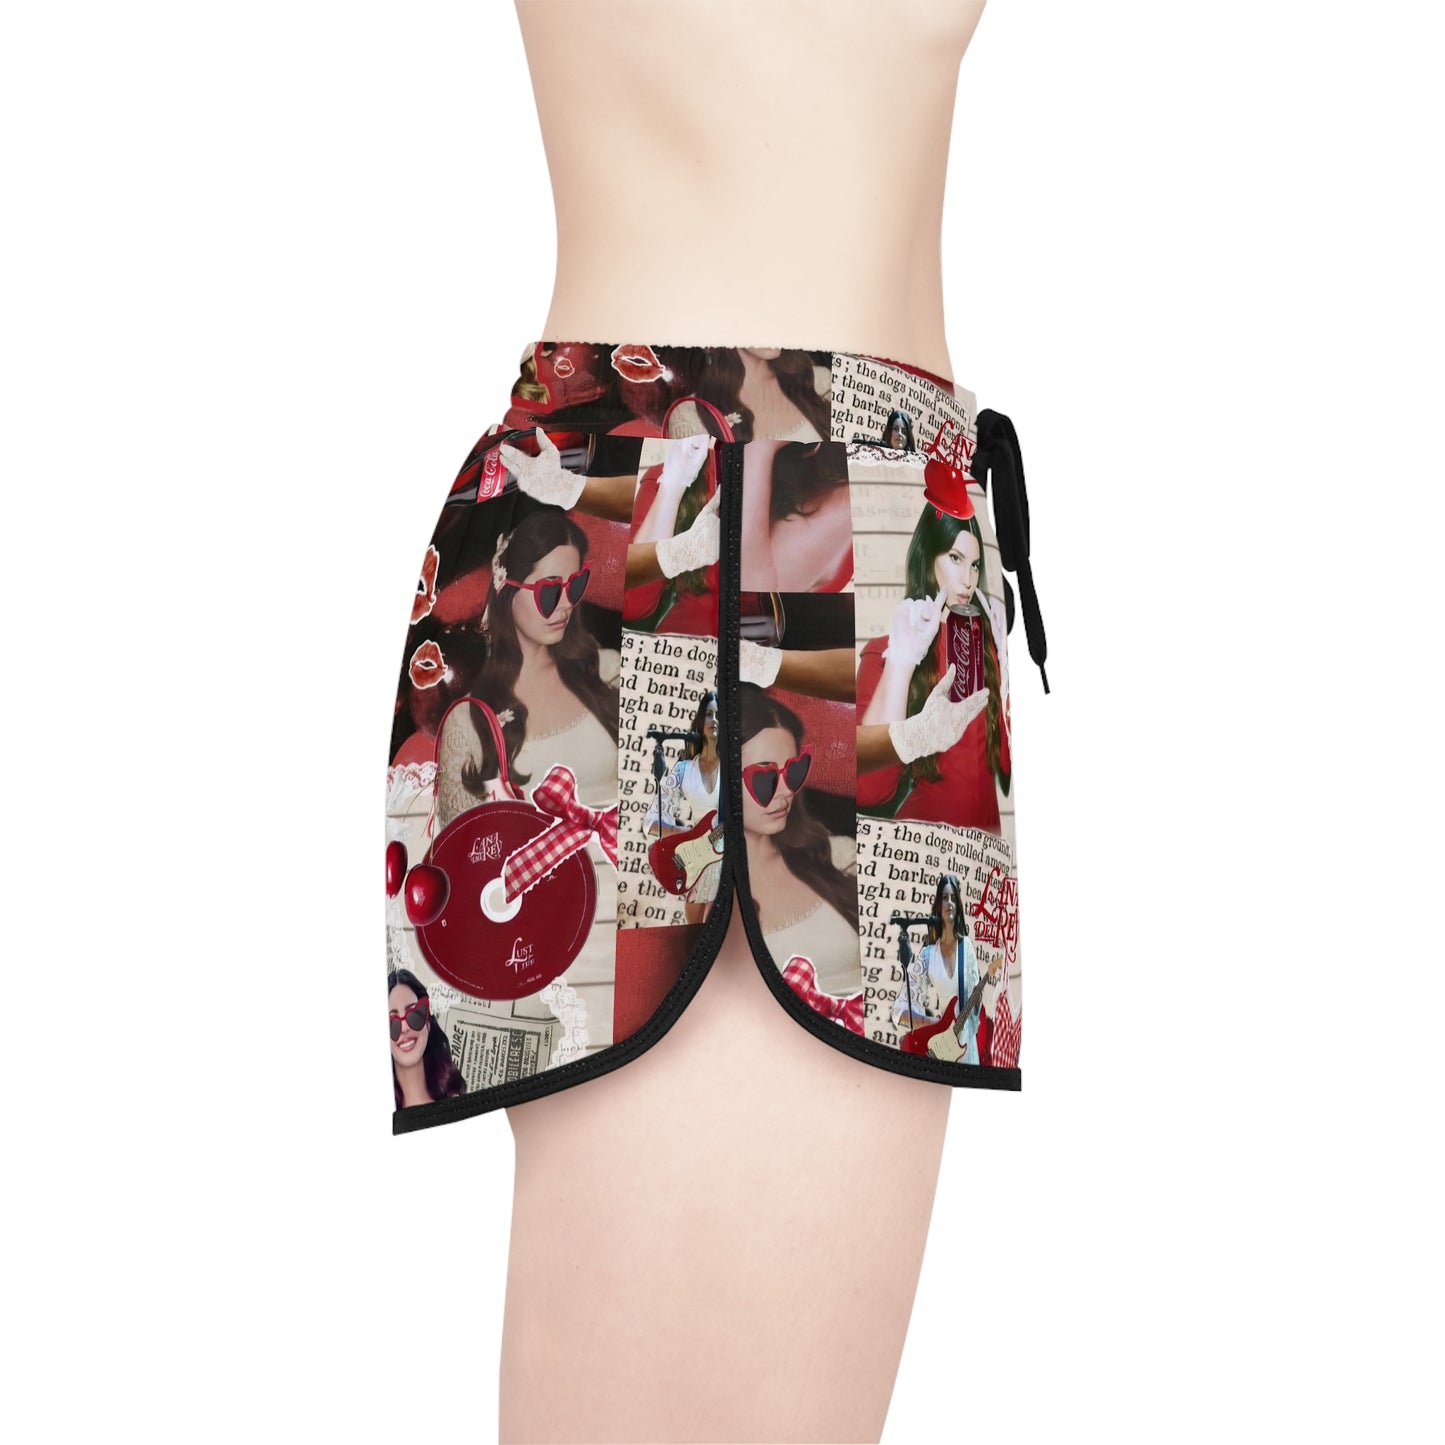 Lana Del Rey Cherry Coke Collage Women's Relaxed Shorts